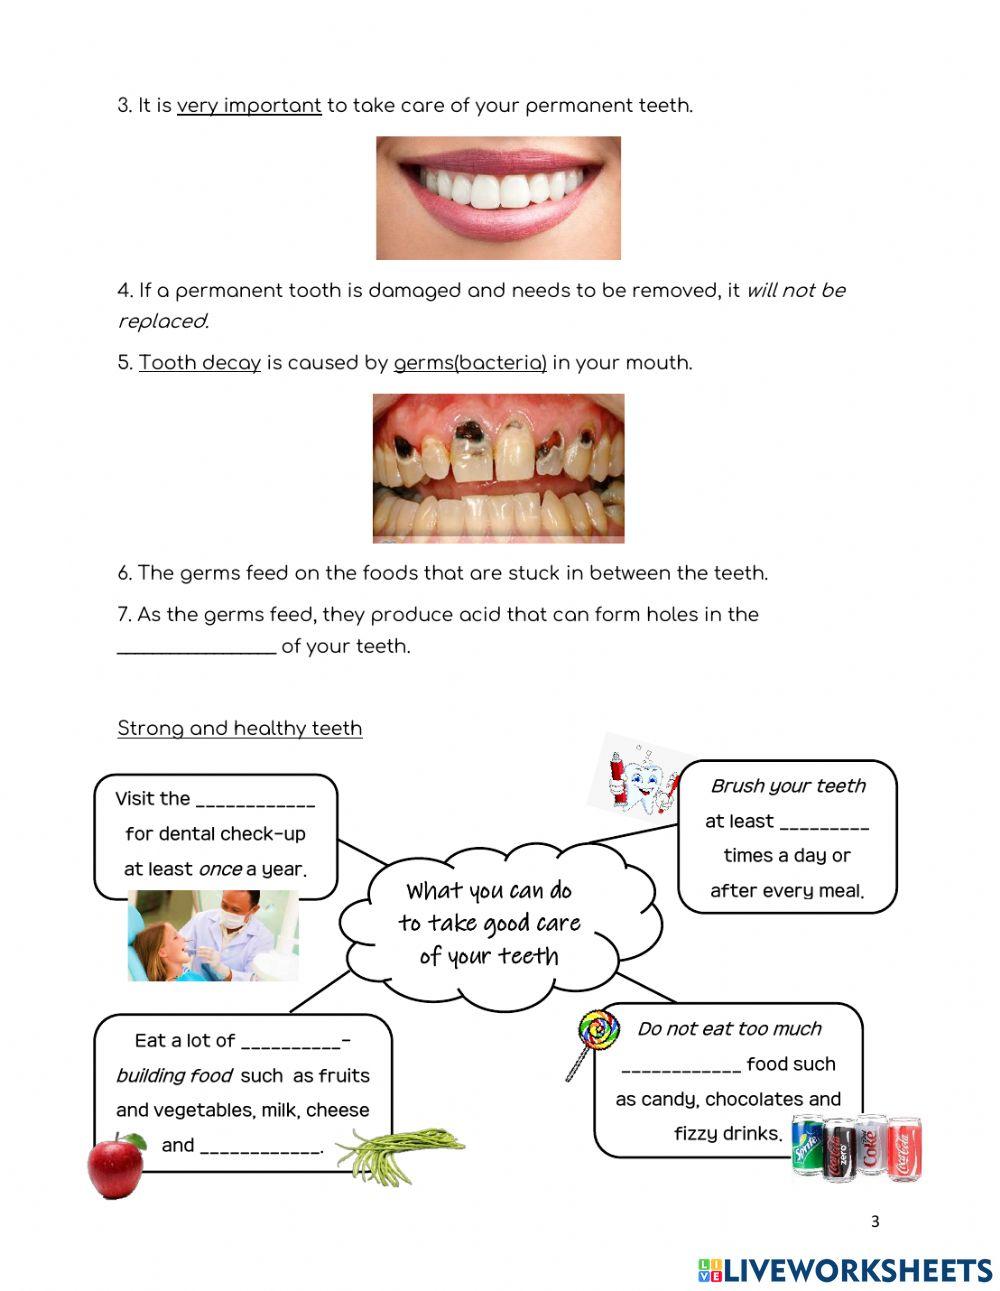 Caring for your teeth